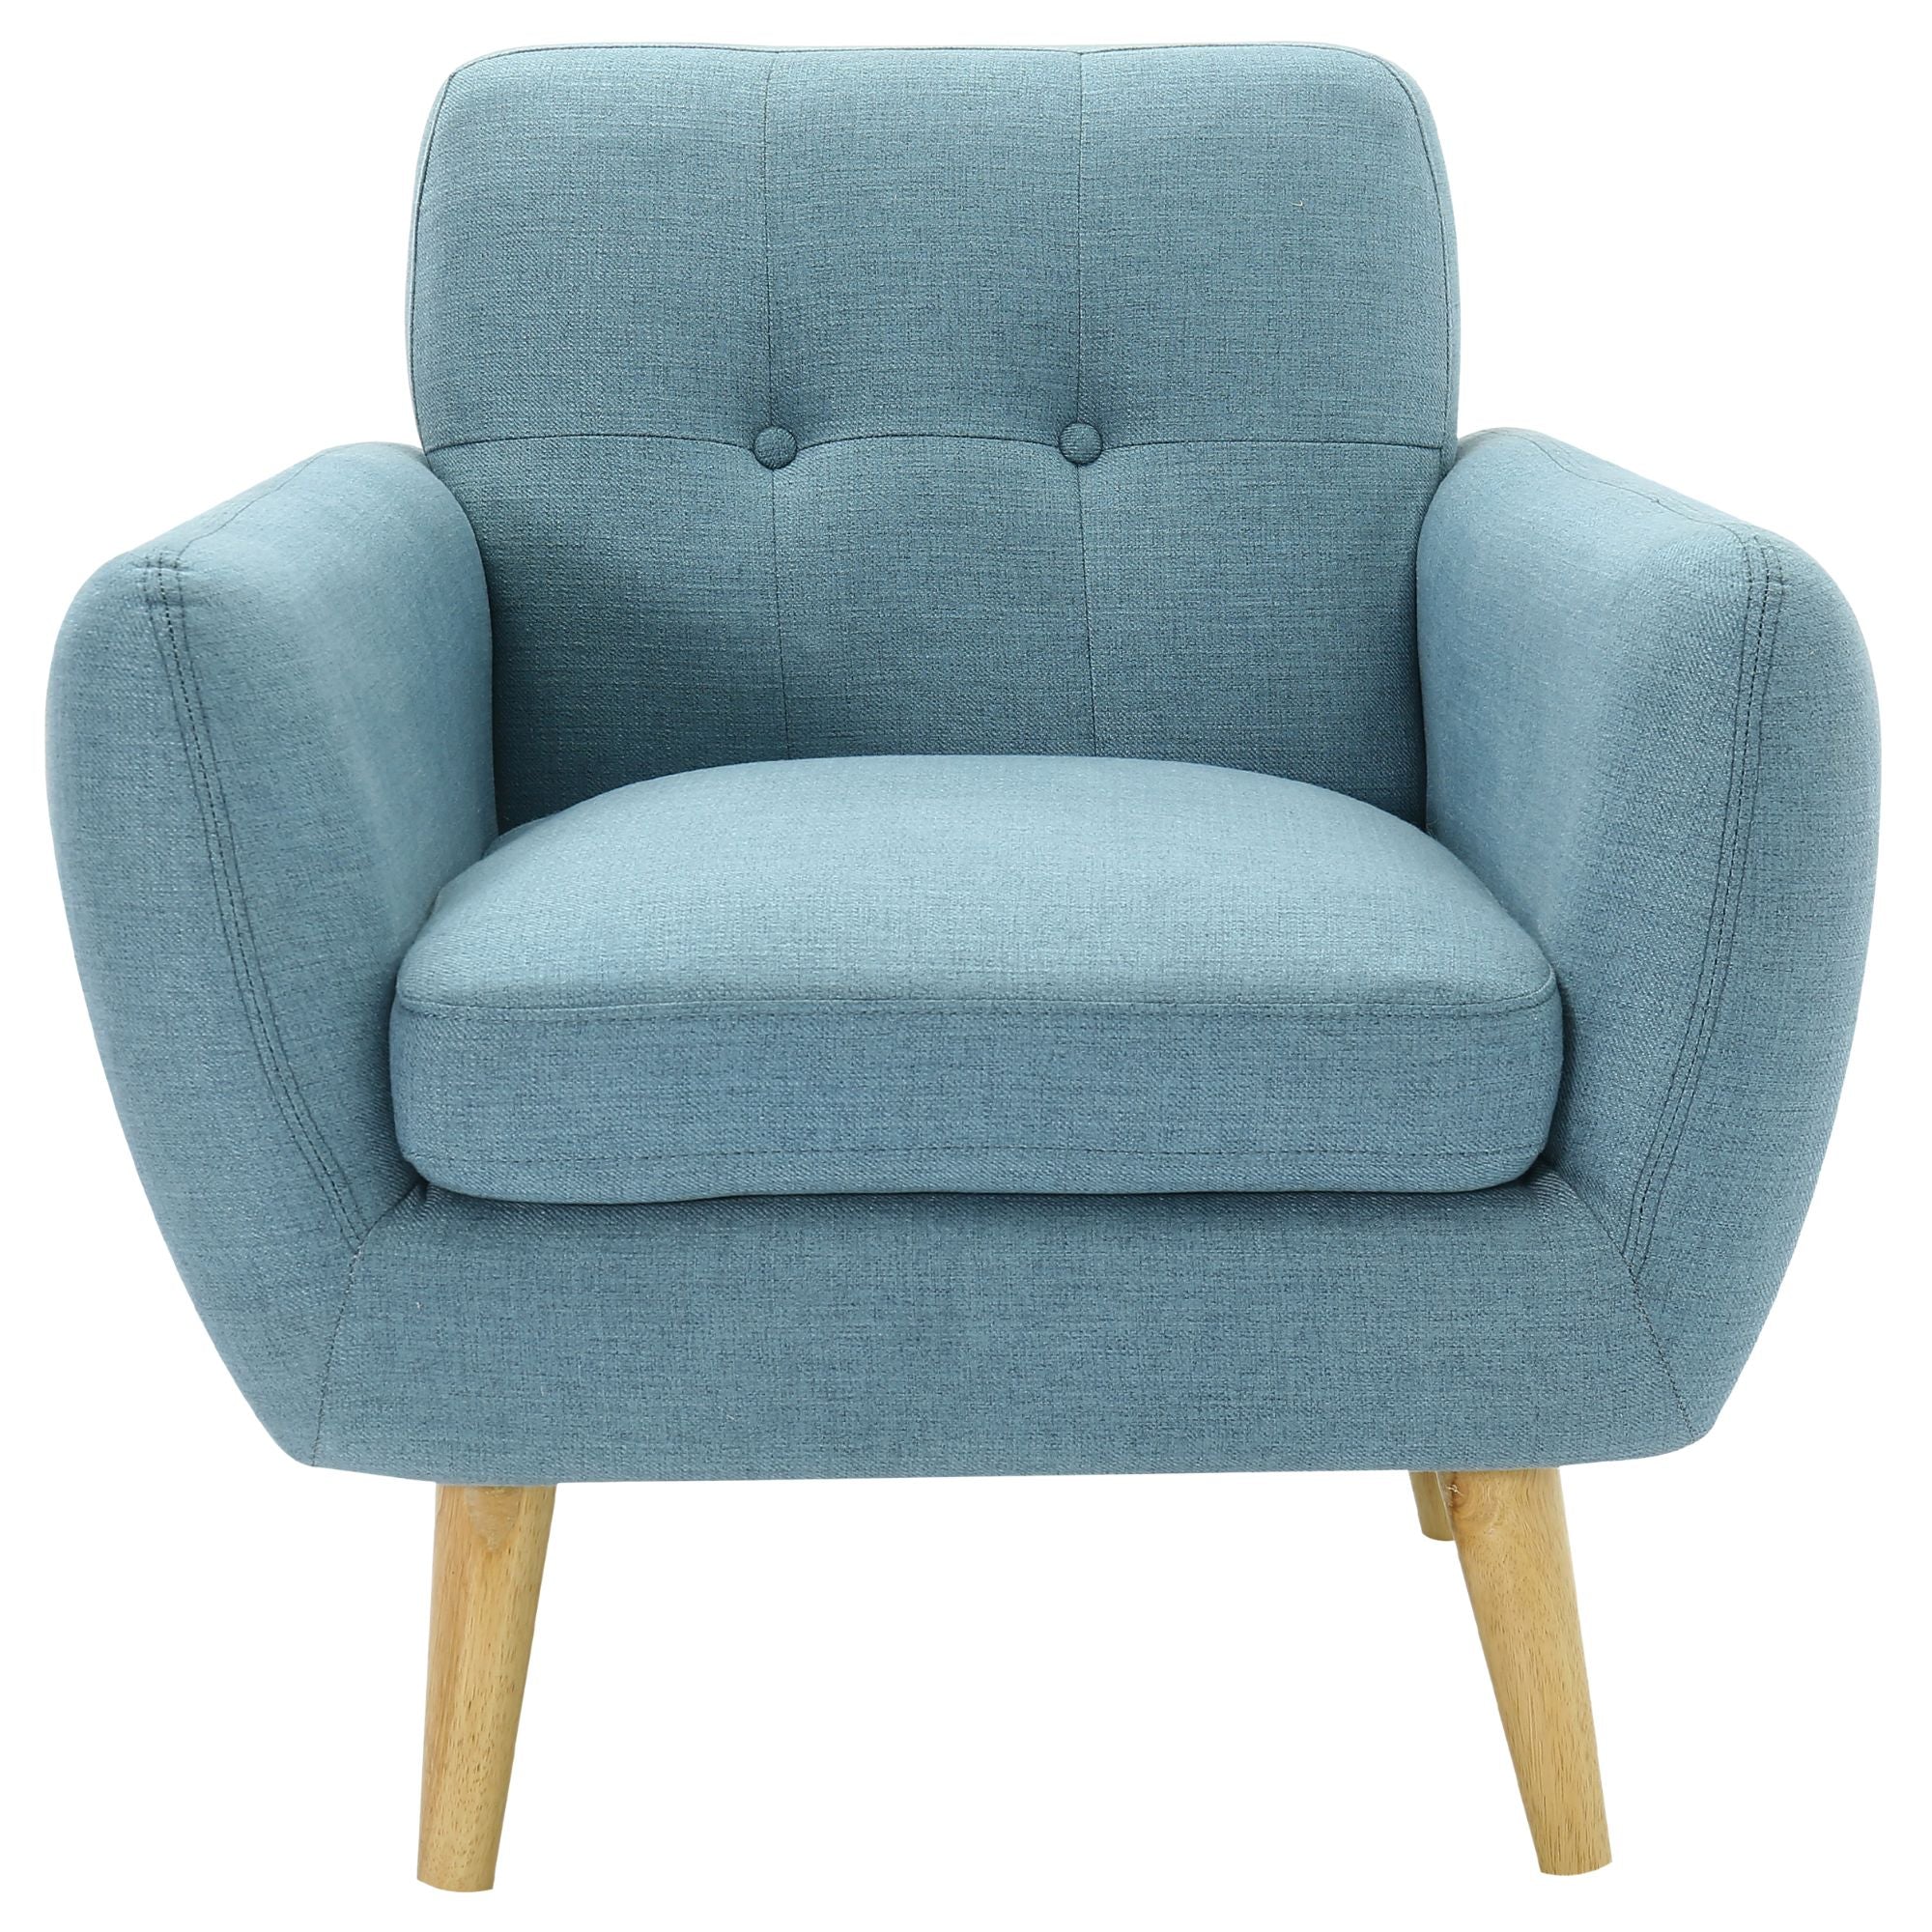 Scandinavian Armchair Upholstered Lounge Accent Chair Couch Sofa Seater Blue